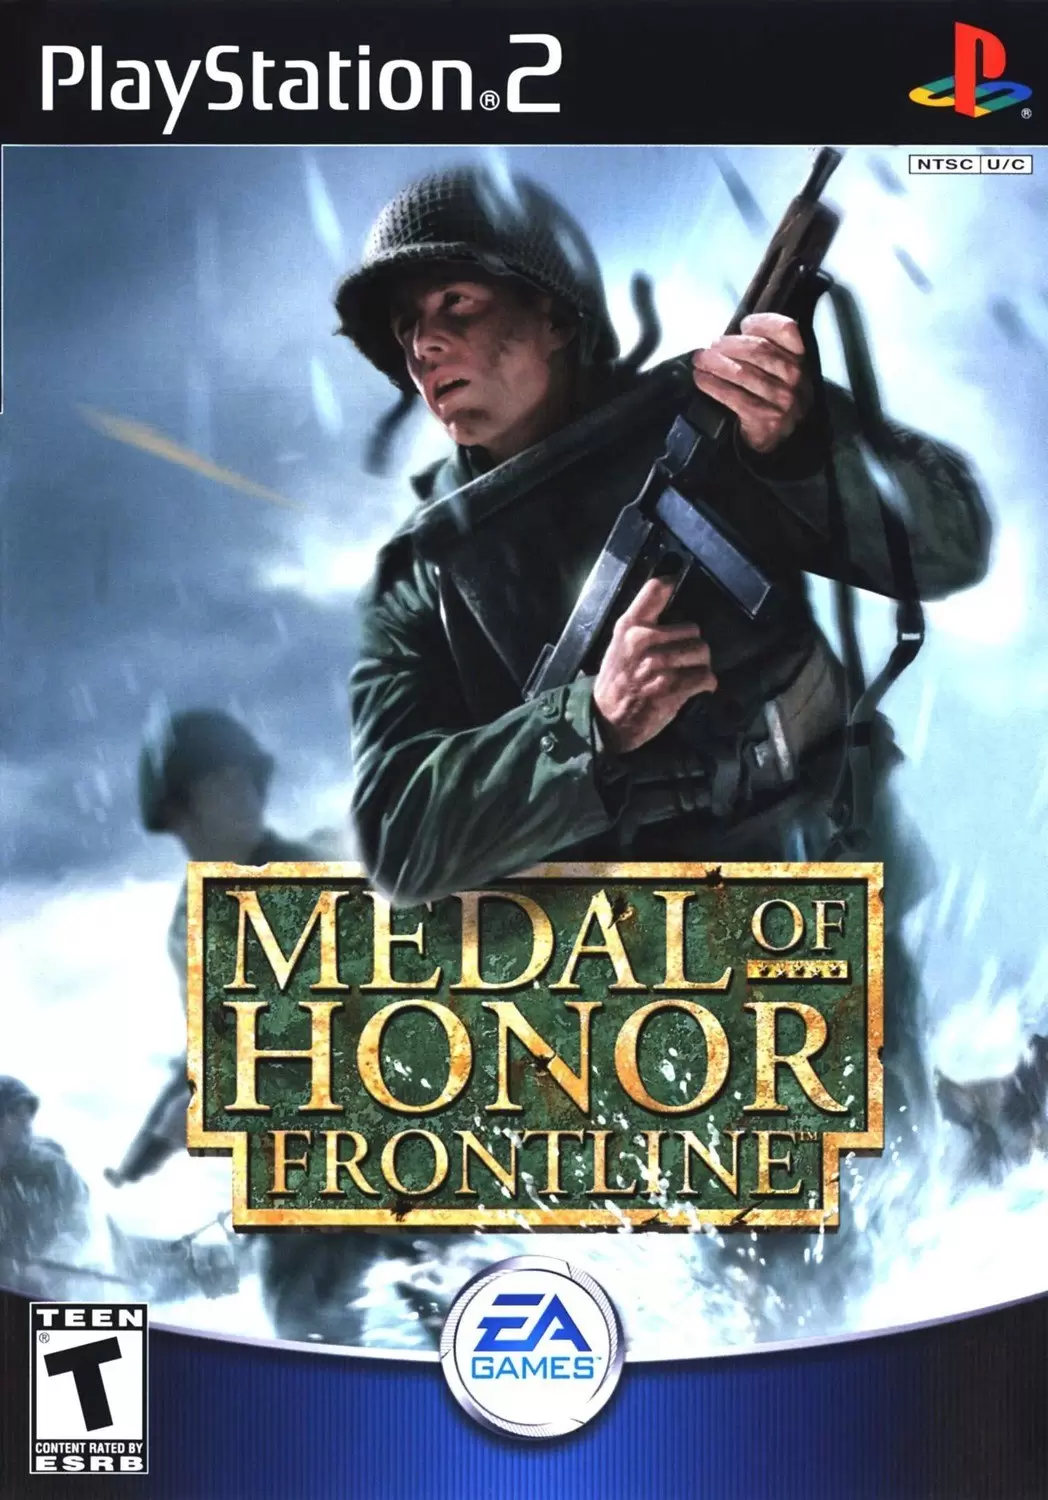 PS2 Games - Medal of Honor: Frontline